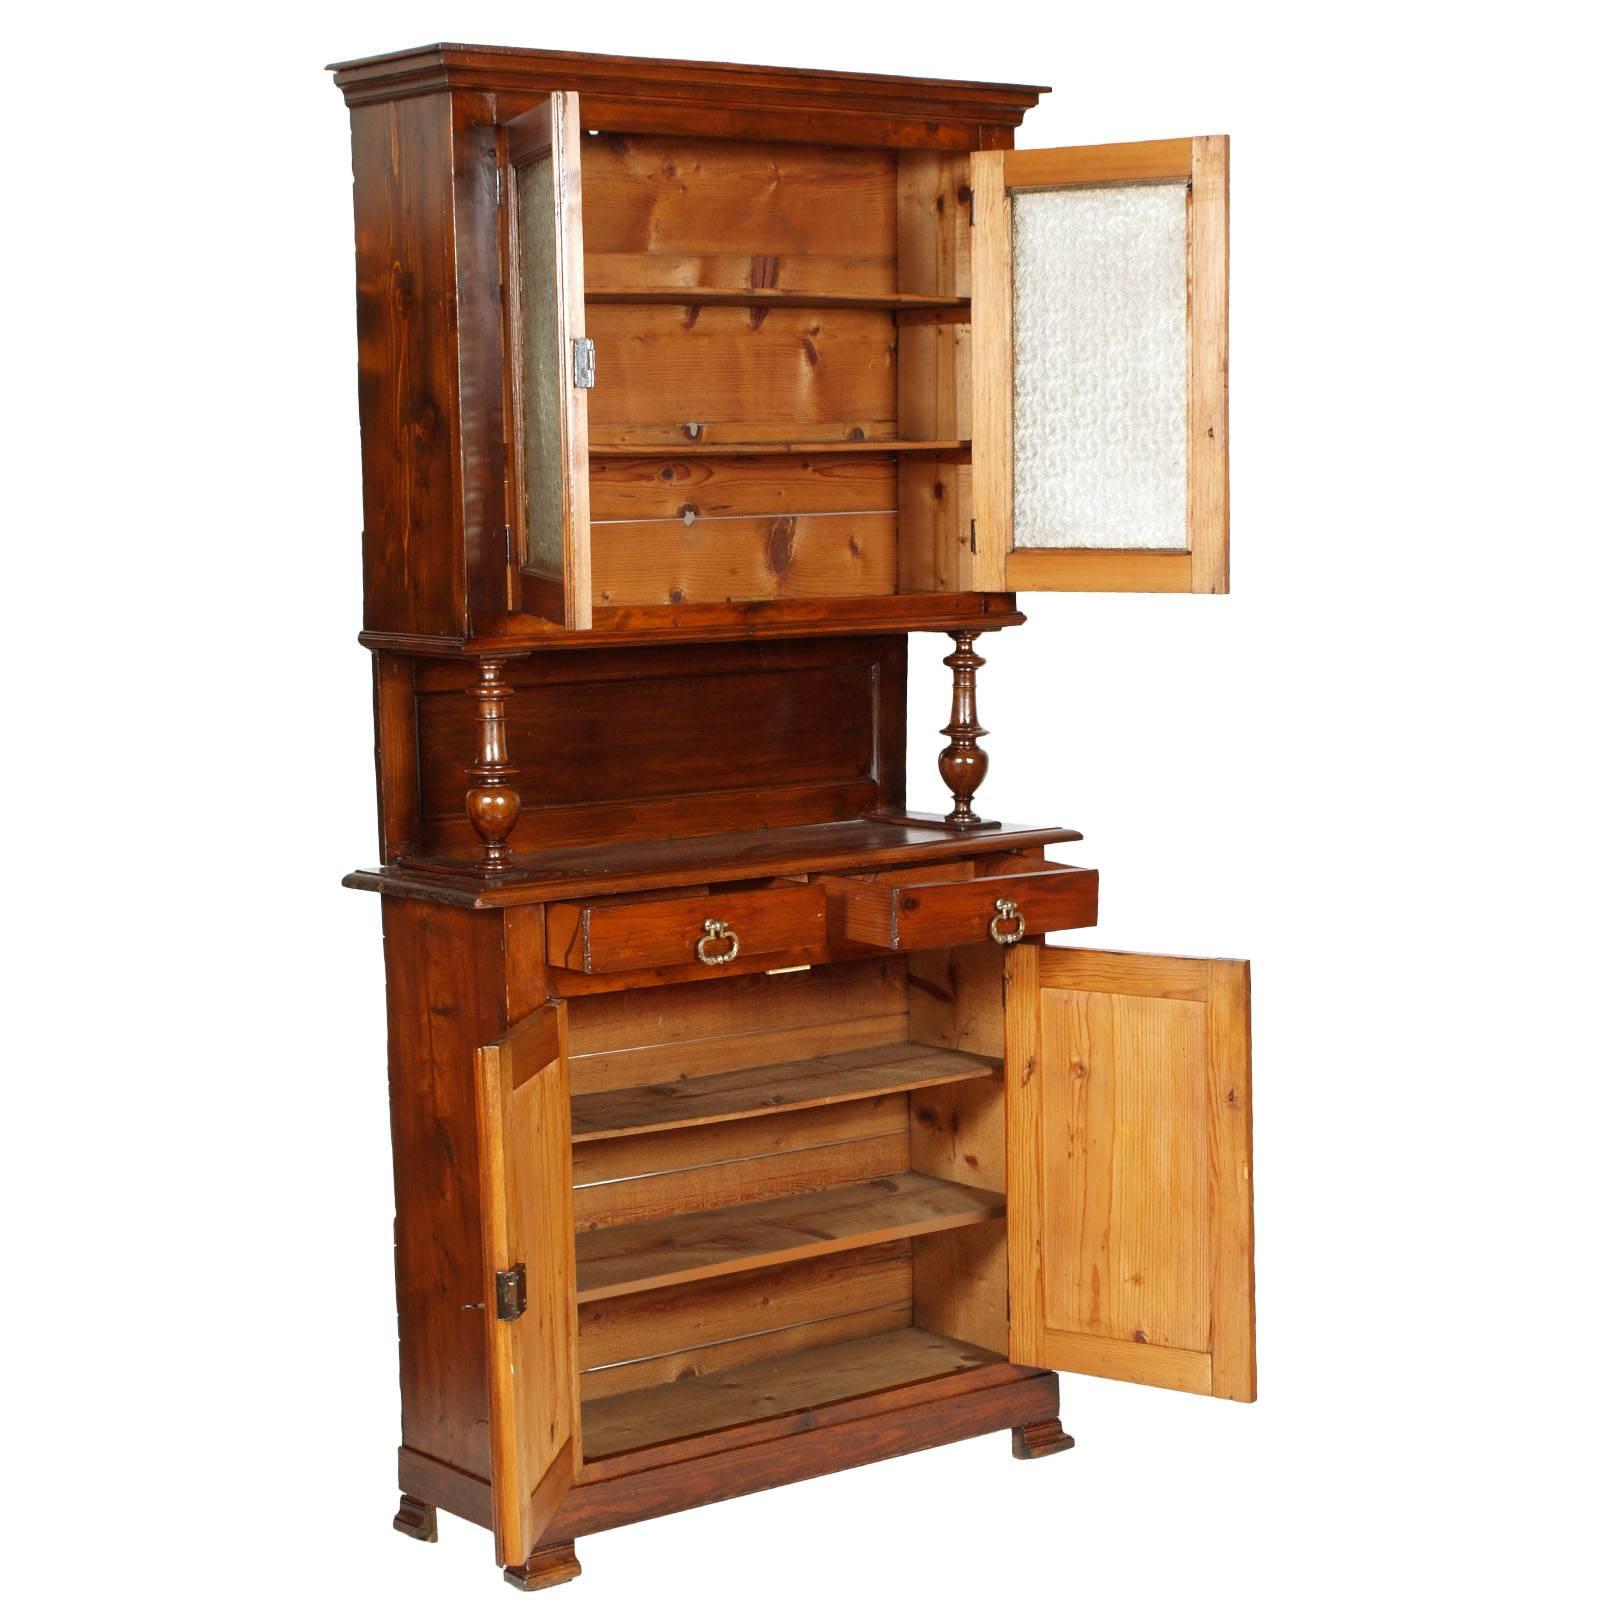 Last 19th century French Provençal vetrine cupboard all solid walnut and pine, restored and finished to shellac and wax

Measures cm: H 100 + 115 W 110 D 43.